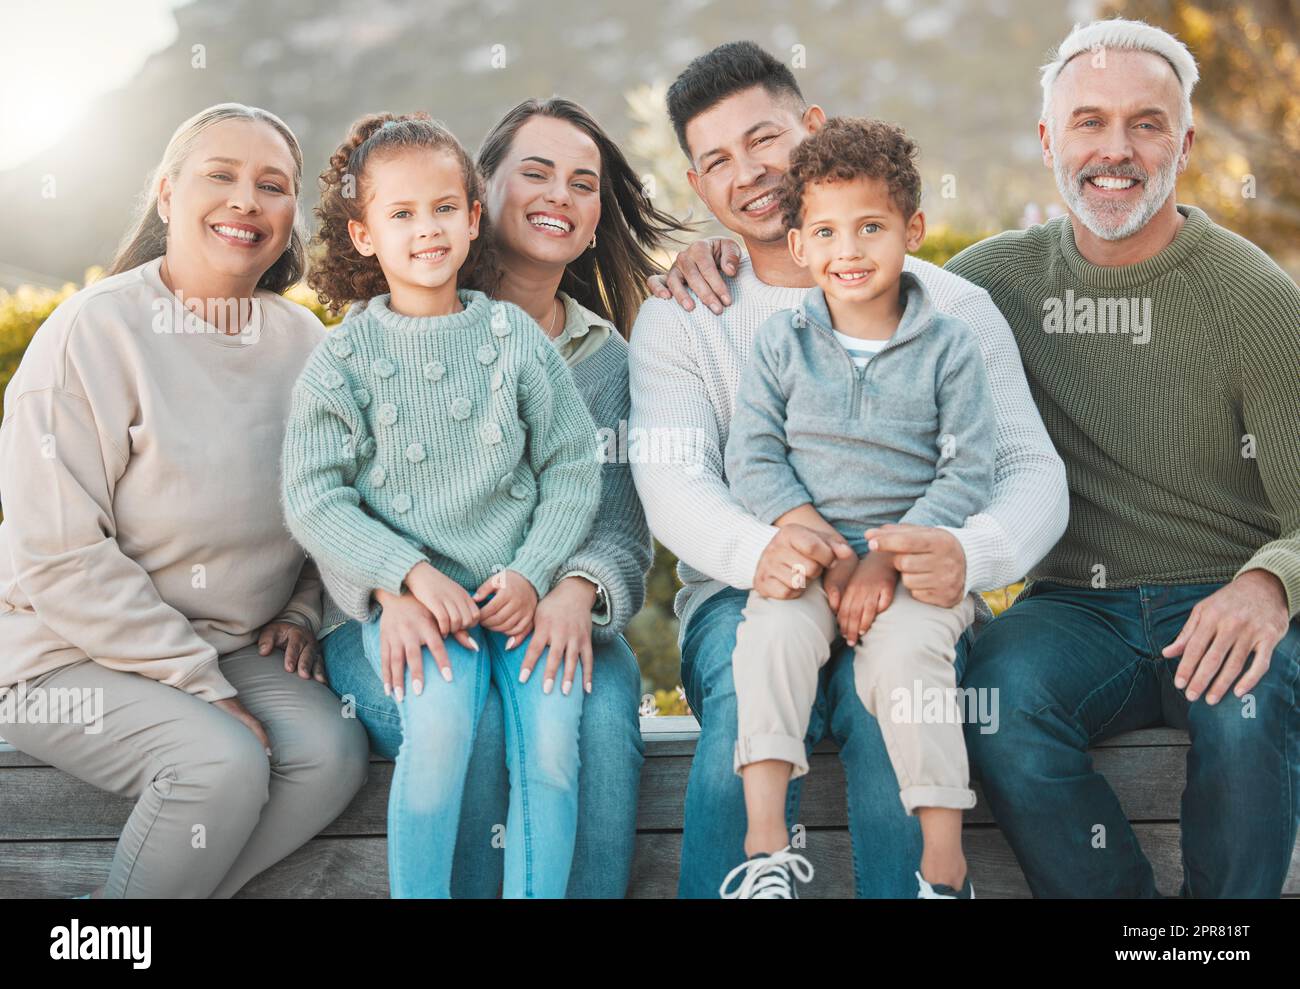 The river of love in families flows deep. Shot of a multi-generational family posing together outdoors. Stock Photo